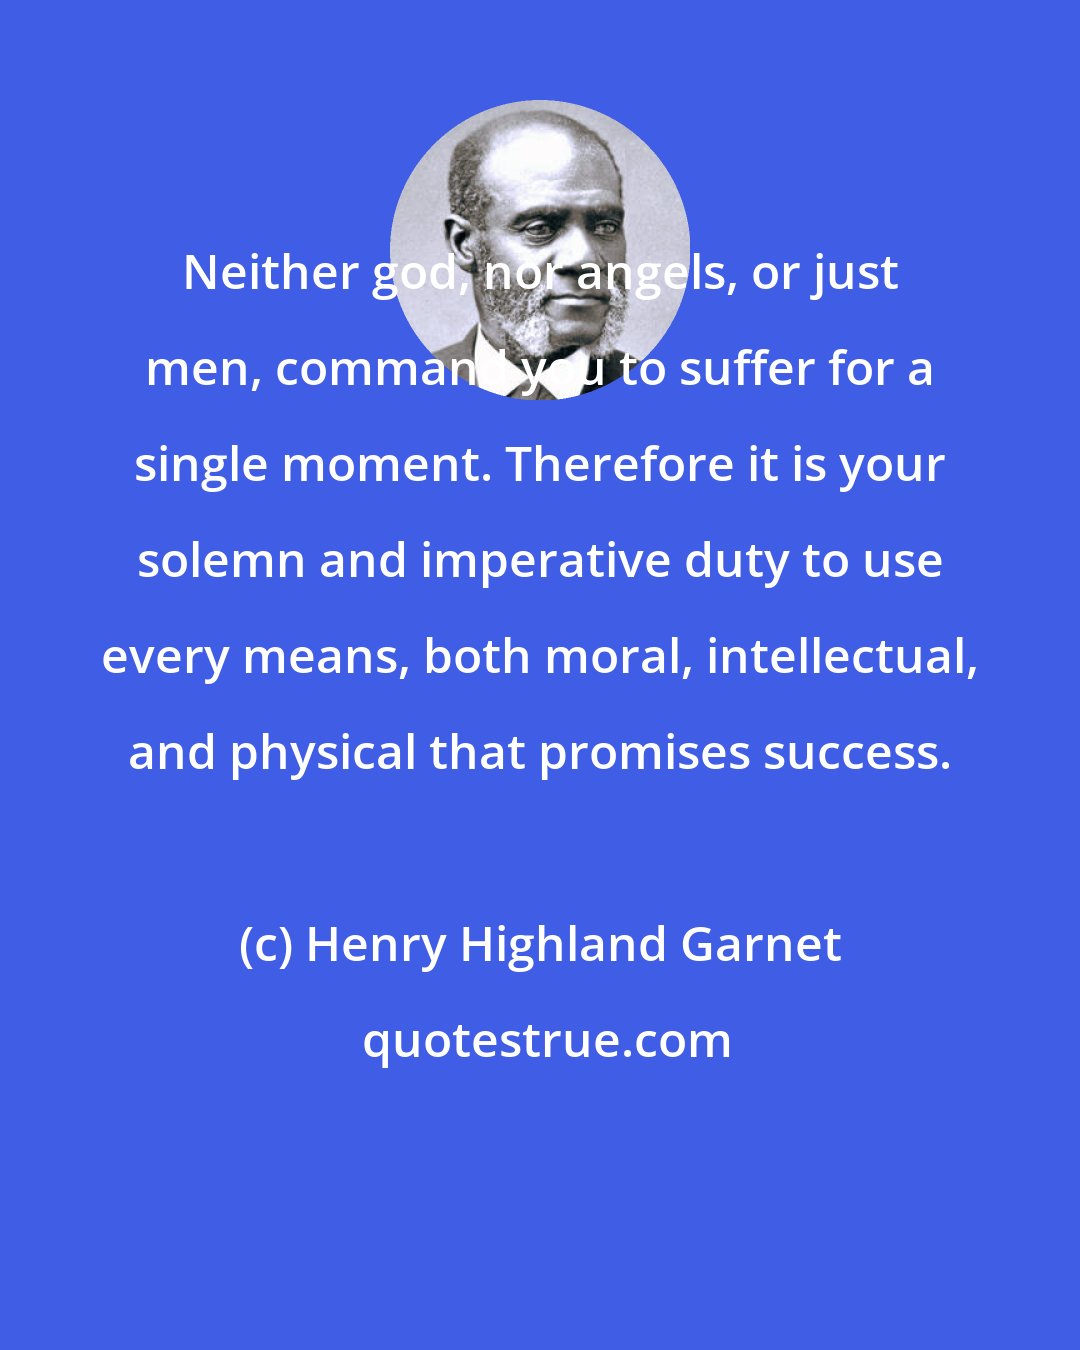 Henry Highland Garnet: Neither god, nor angels, or just men, command you to suffer for a single moment. Therefore it is your solemn and imperative duty to use every means, both moral, intellectual, and physical that promises success.